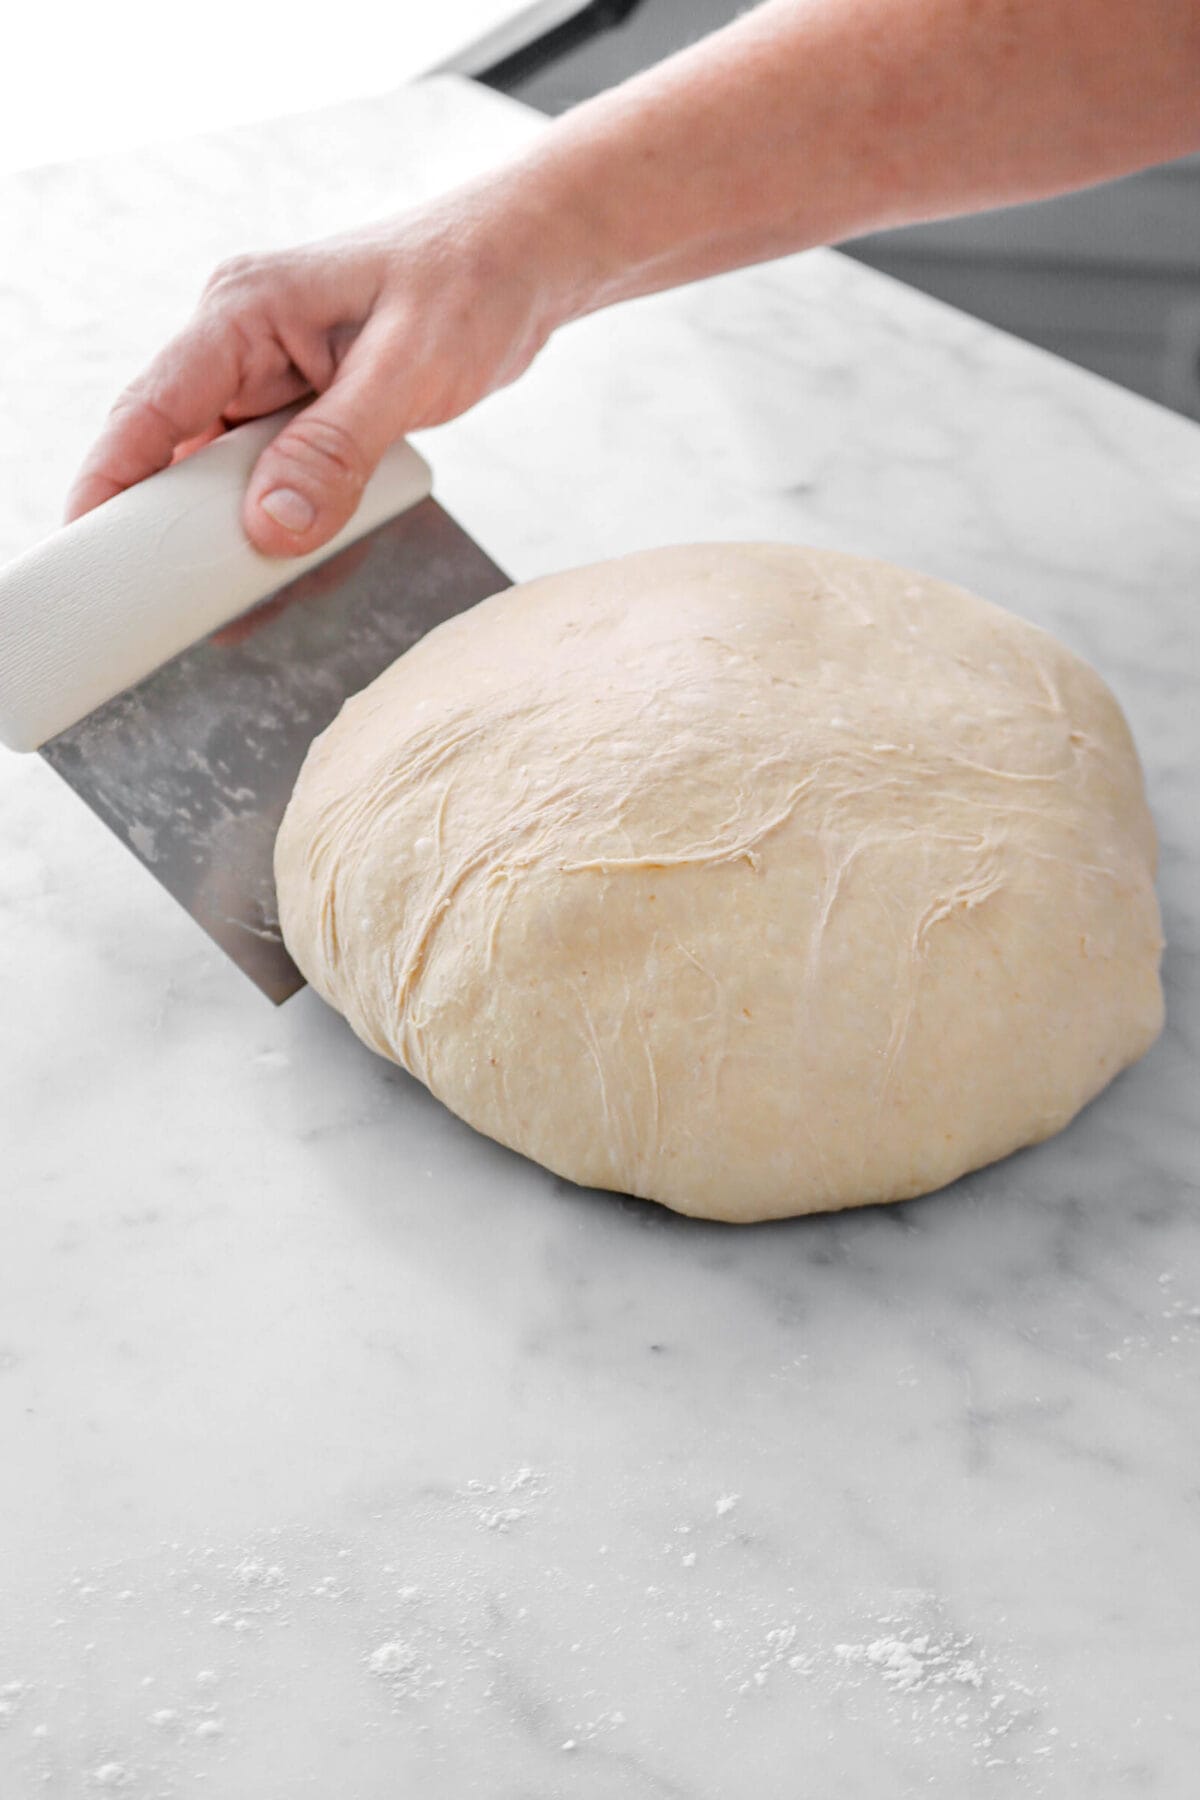 dough being shaped into a boule with bench scraper on marble surface.